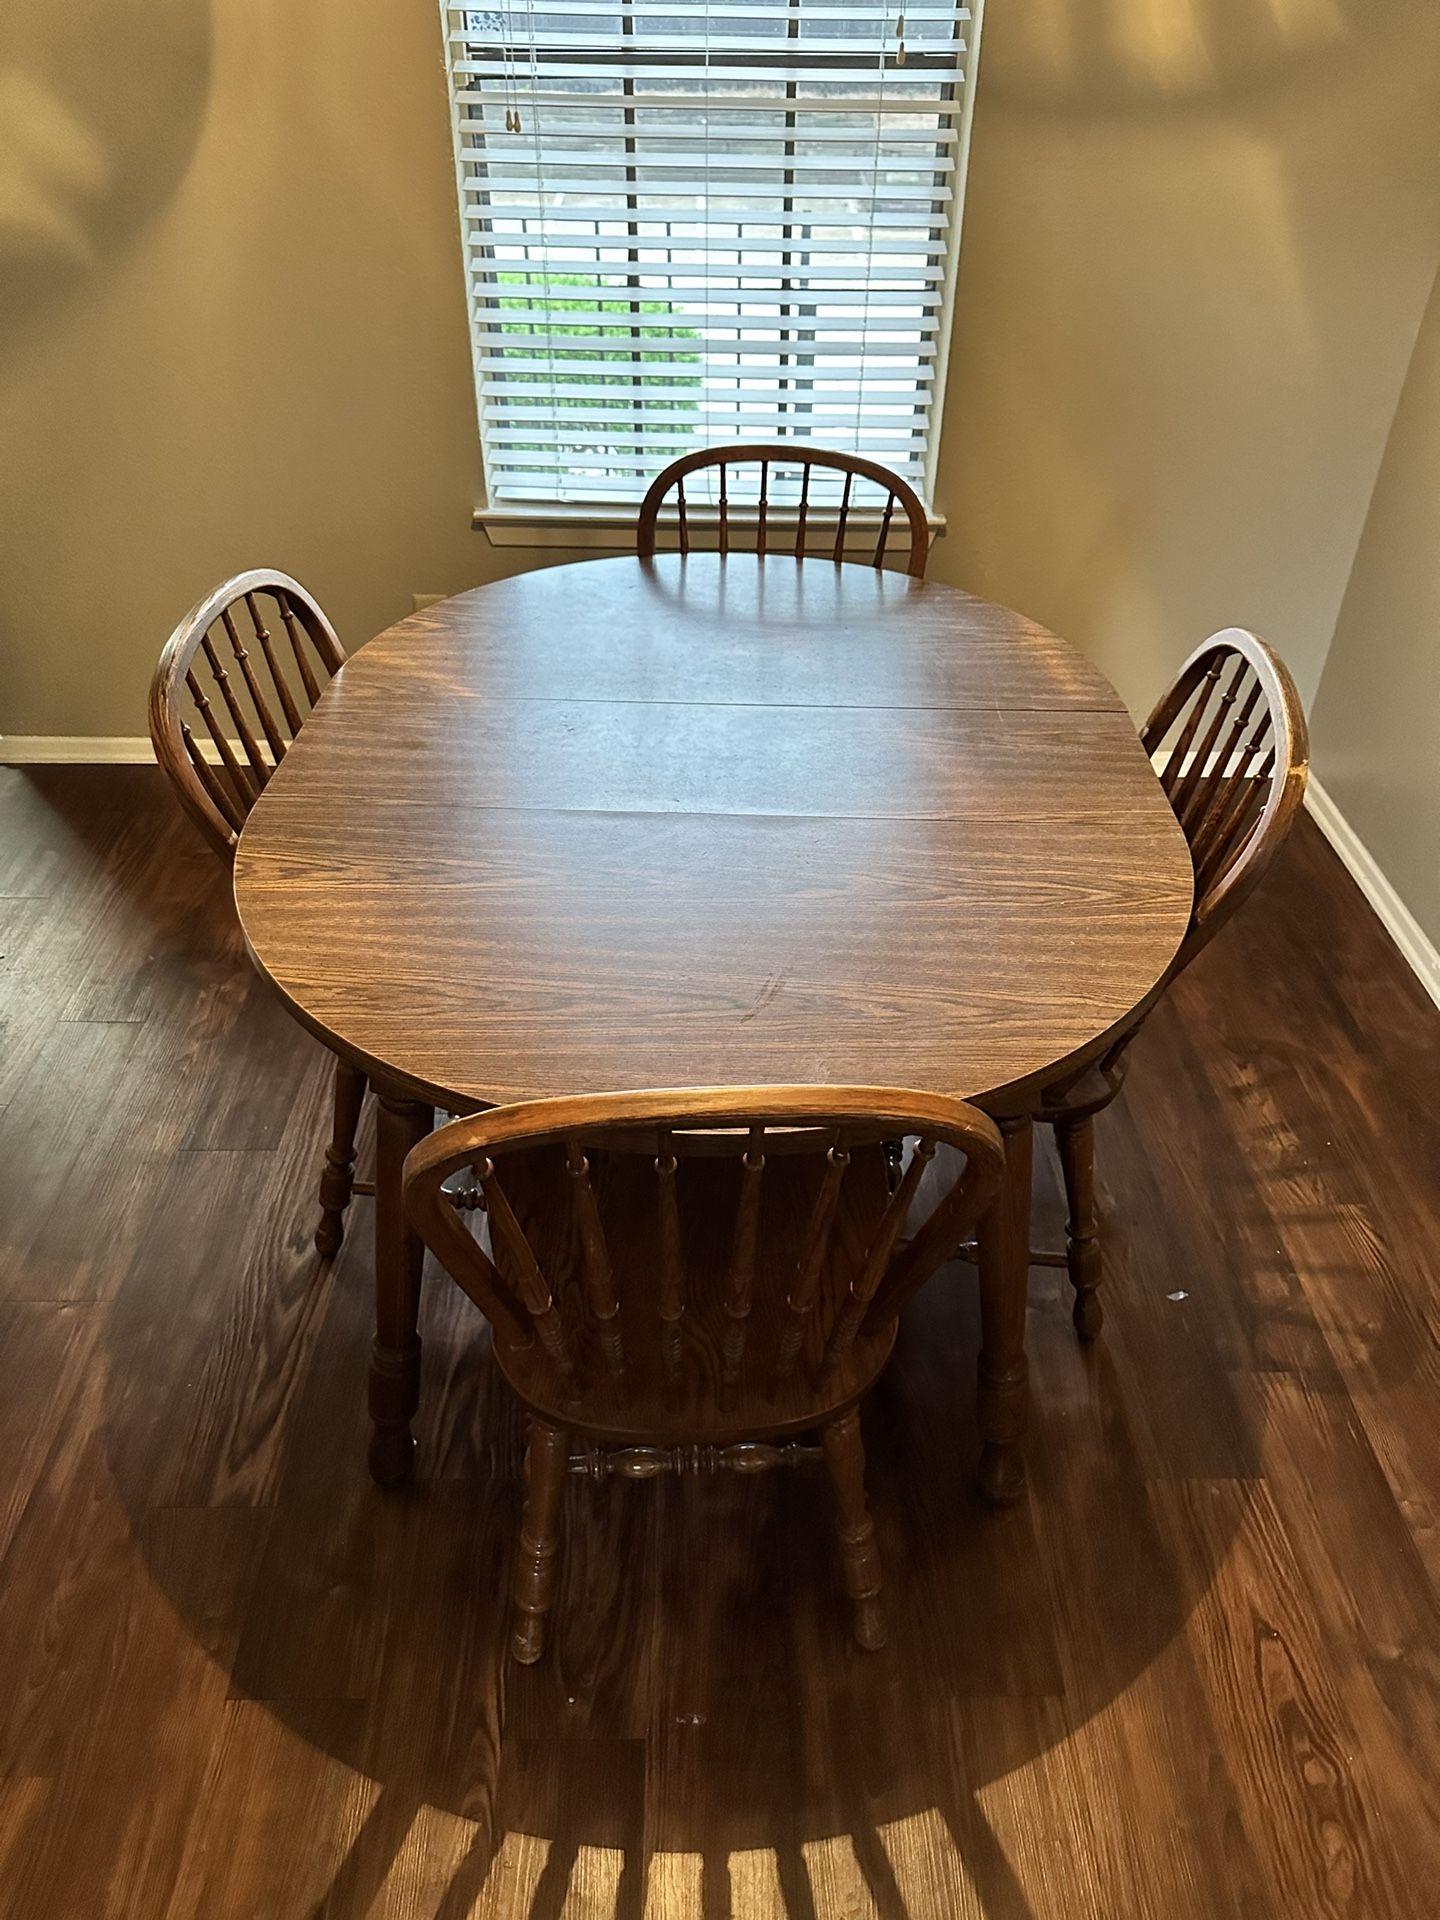 FREE BROWN WOOD TABLE SEATS 4